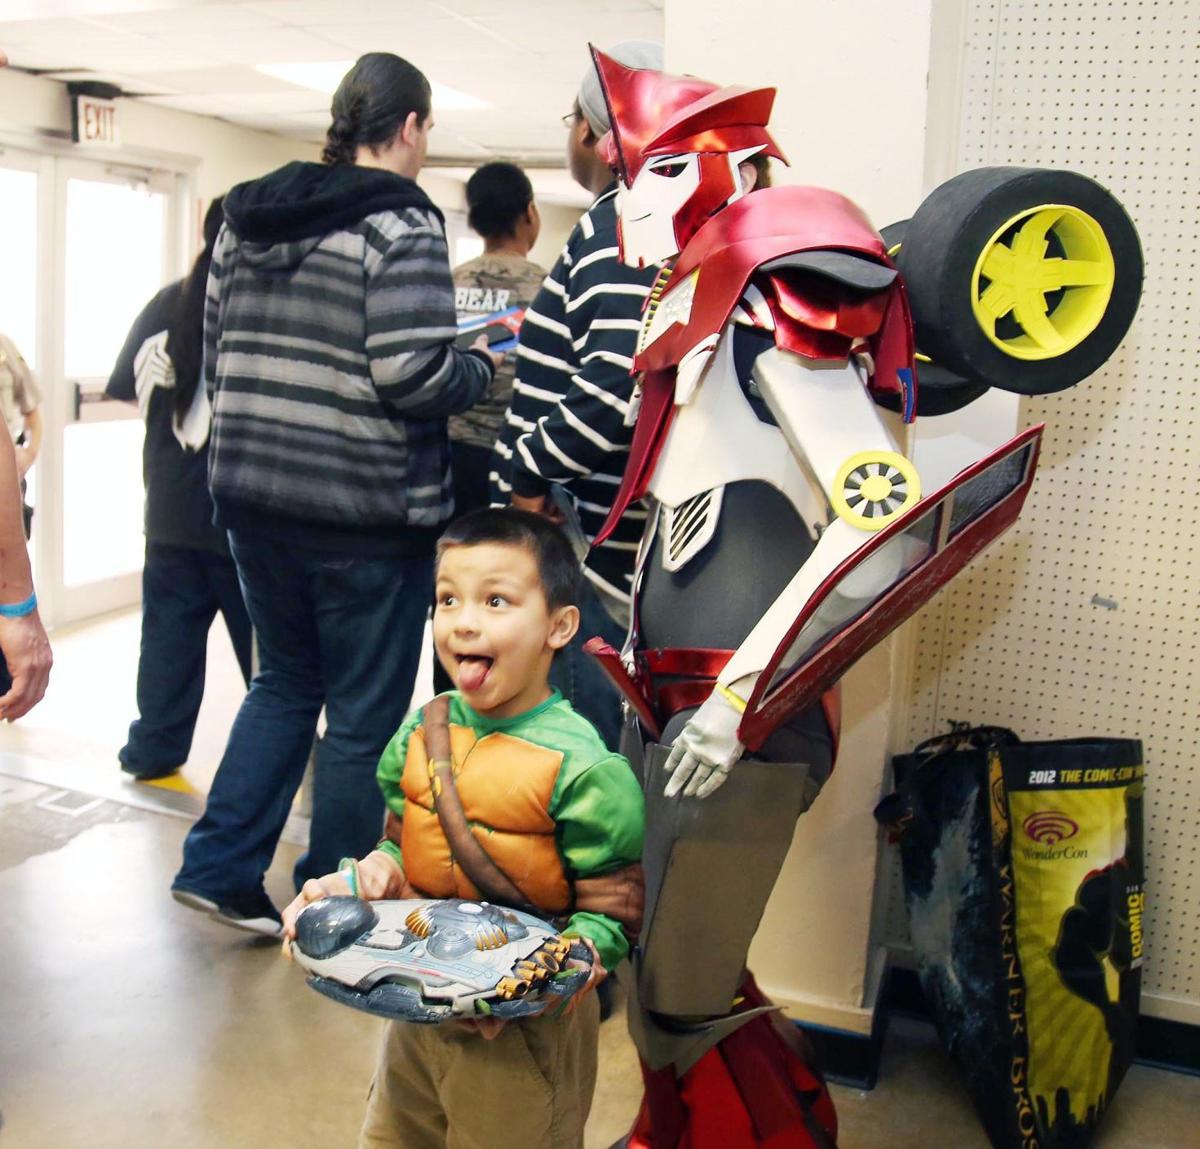 HOT Comic Con going bigger for 2nd event in Waco Access Waco